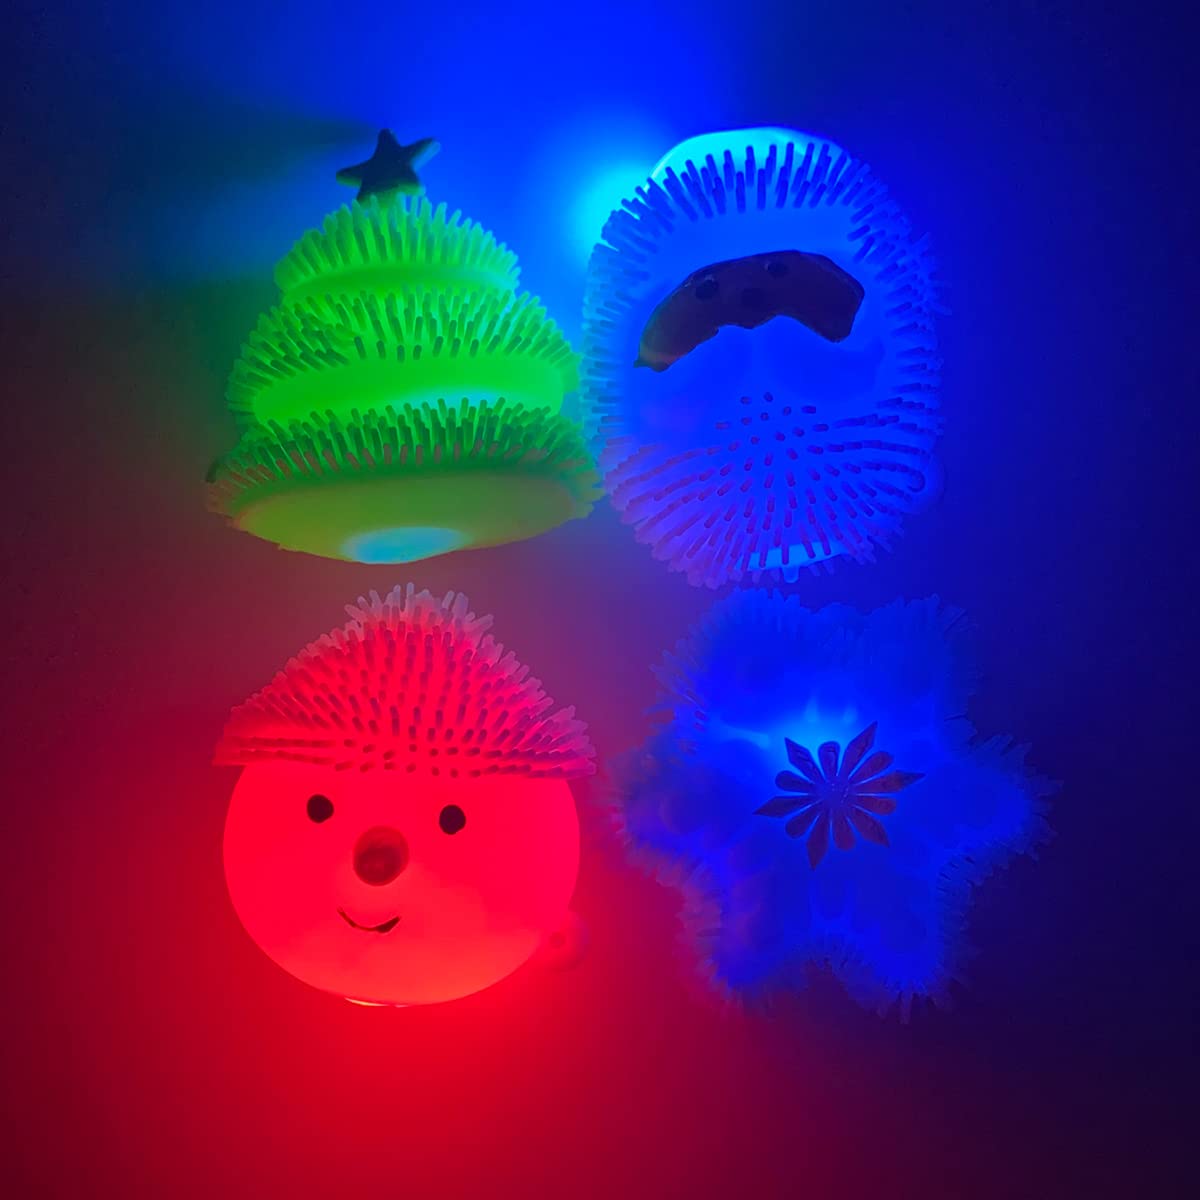 JoFAN 4 Pack Christmas Light Up Spiky Balls Squeeze Balls Toys for Kids Boys Girls Toddlers Christmas Stocking Stuffers Party Favors Gifts